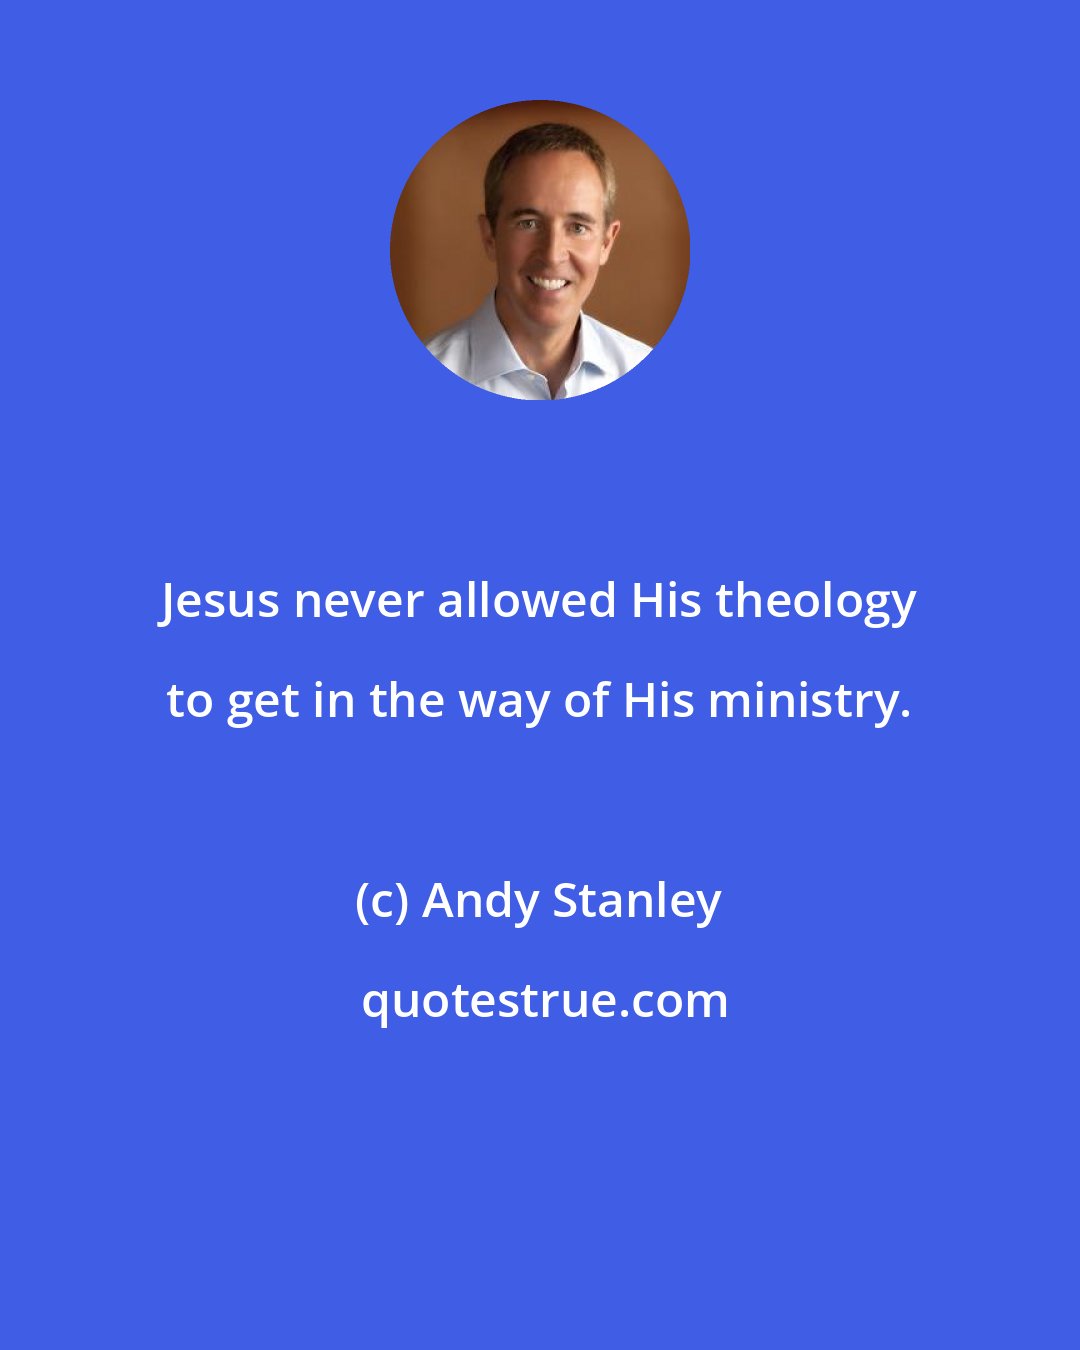 Andy Stanley: Jesus never allowed His theology to get in the way of His ministry.